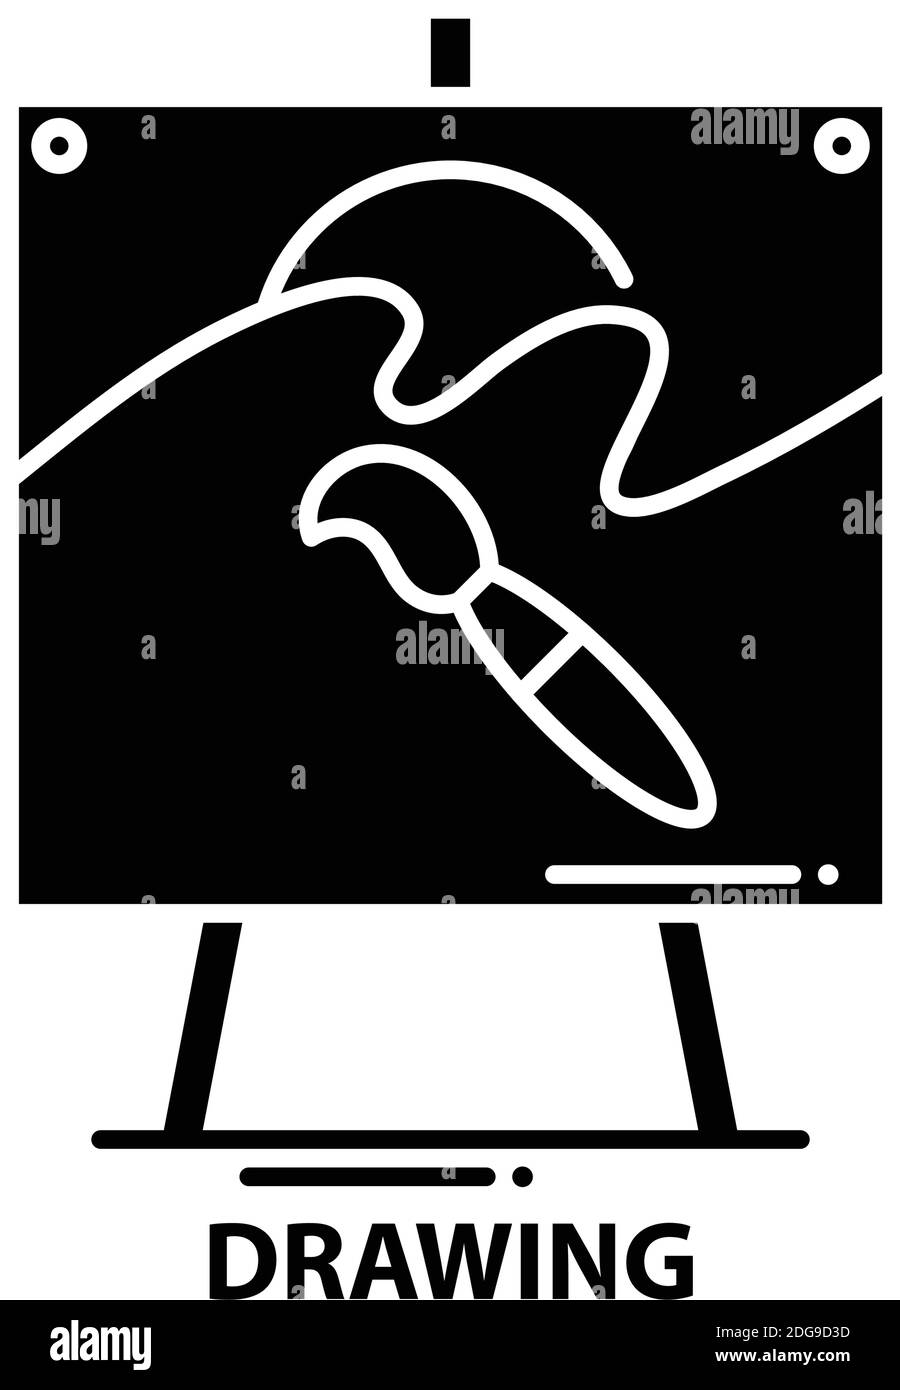 drawing icon, black vector sign with editable strokes, concept illustration Stock Vector